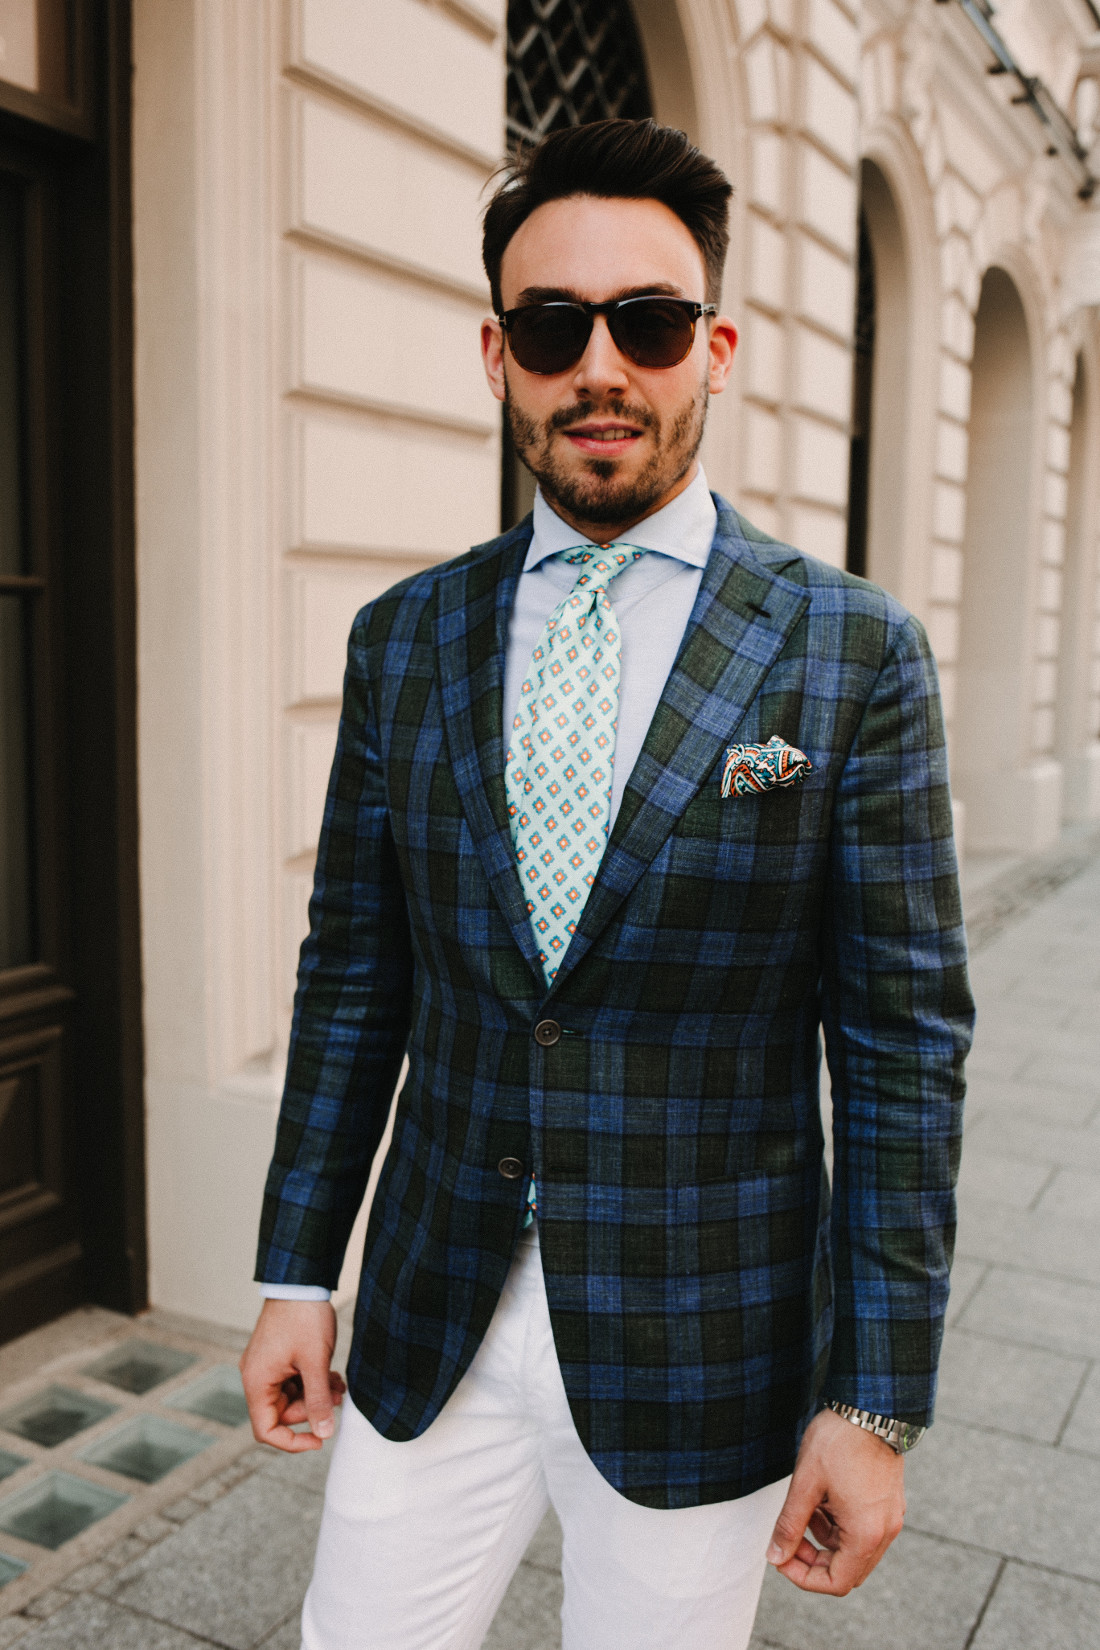 Linen outfit, Kiton tie, Santoni shoes, Tom Ford Sunglasses, Davide Made to Measure jacket